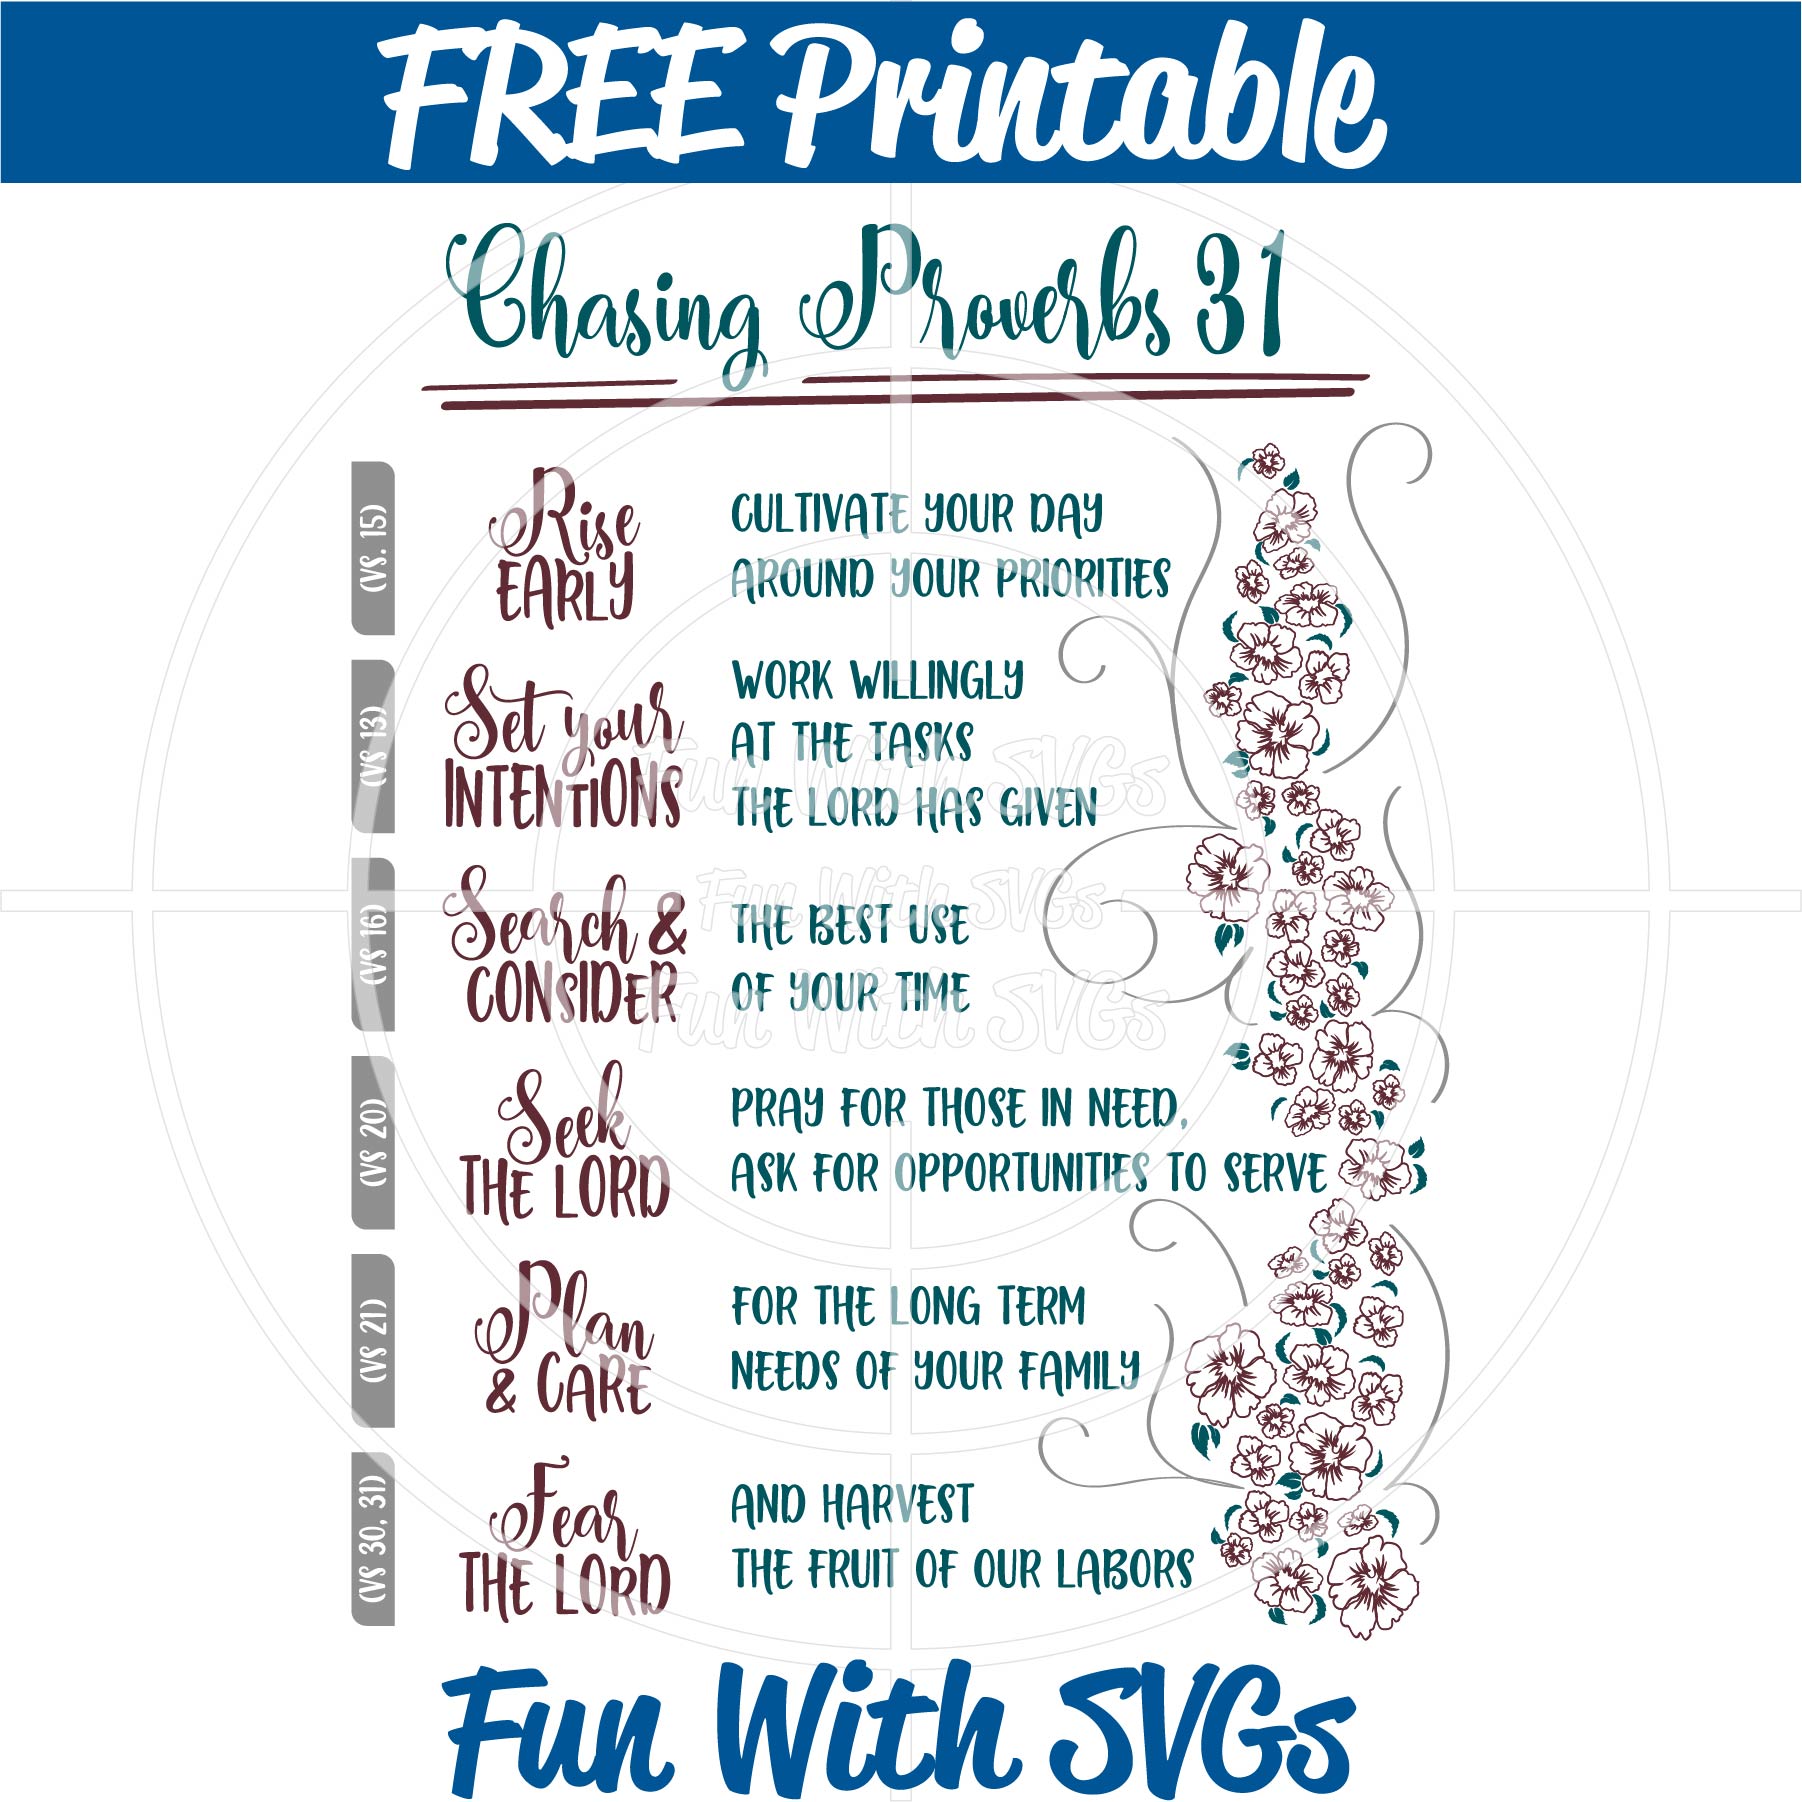 Chasing Proverbs 31 FREE Christian Printable Fun With SVGs